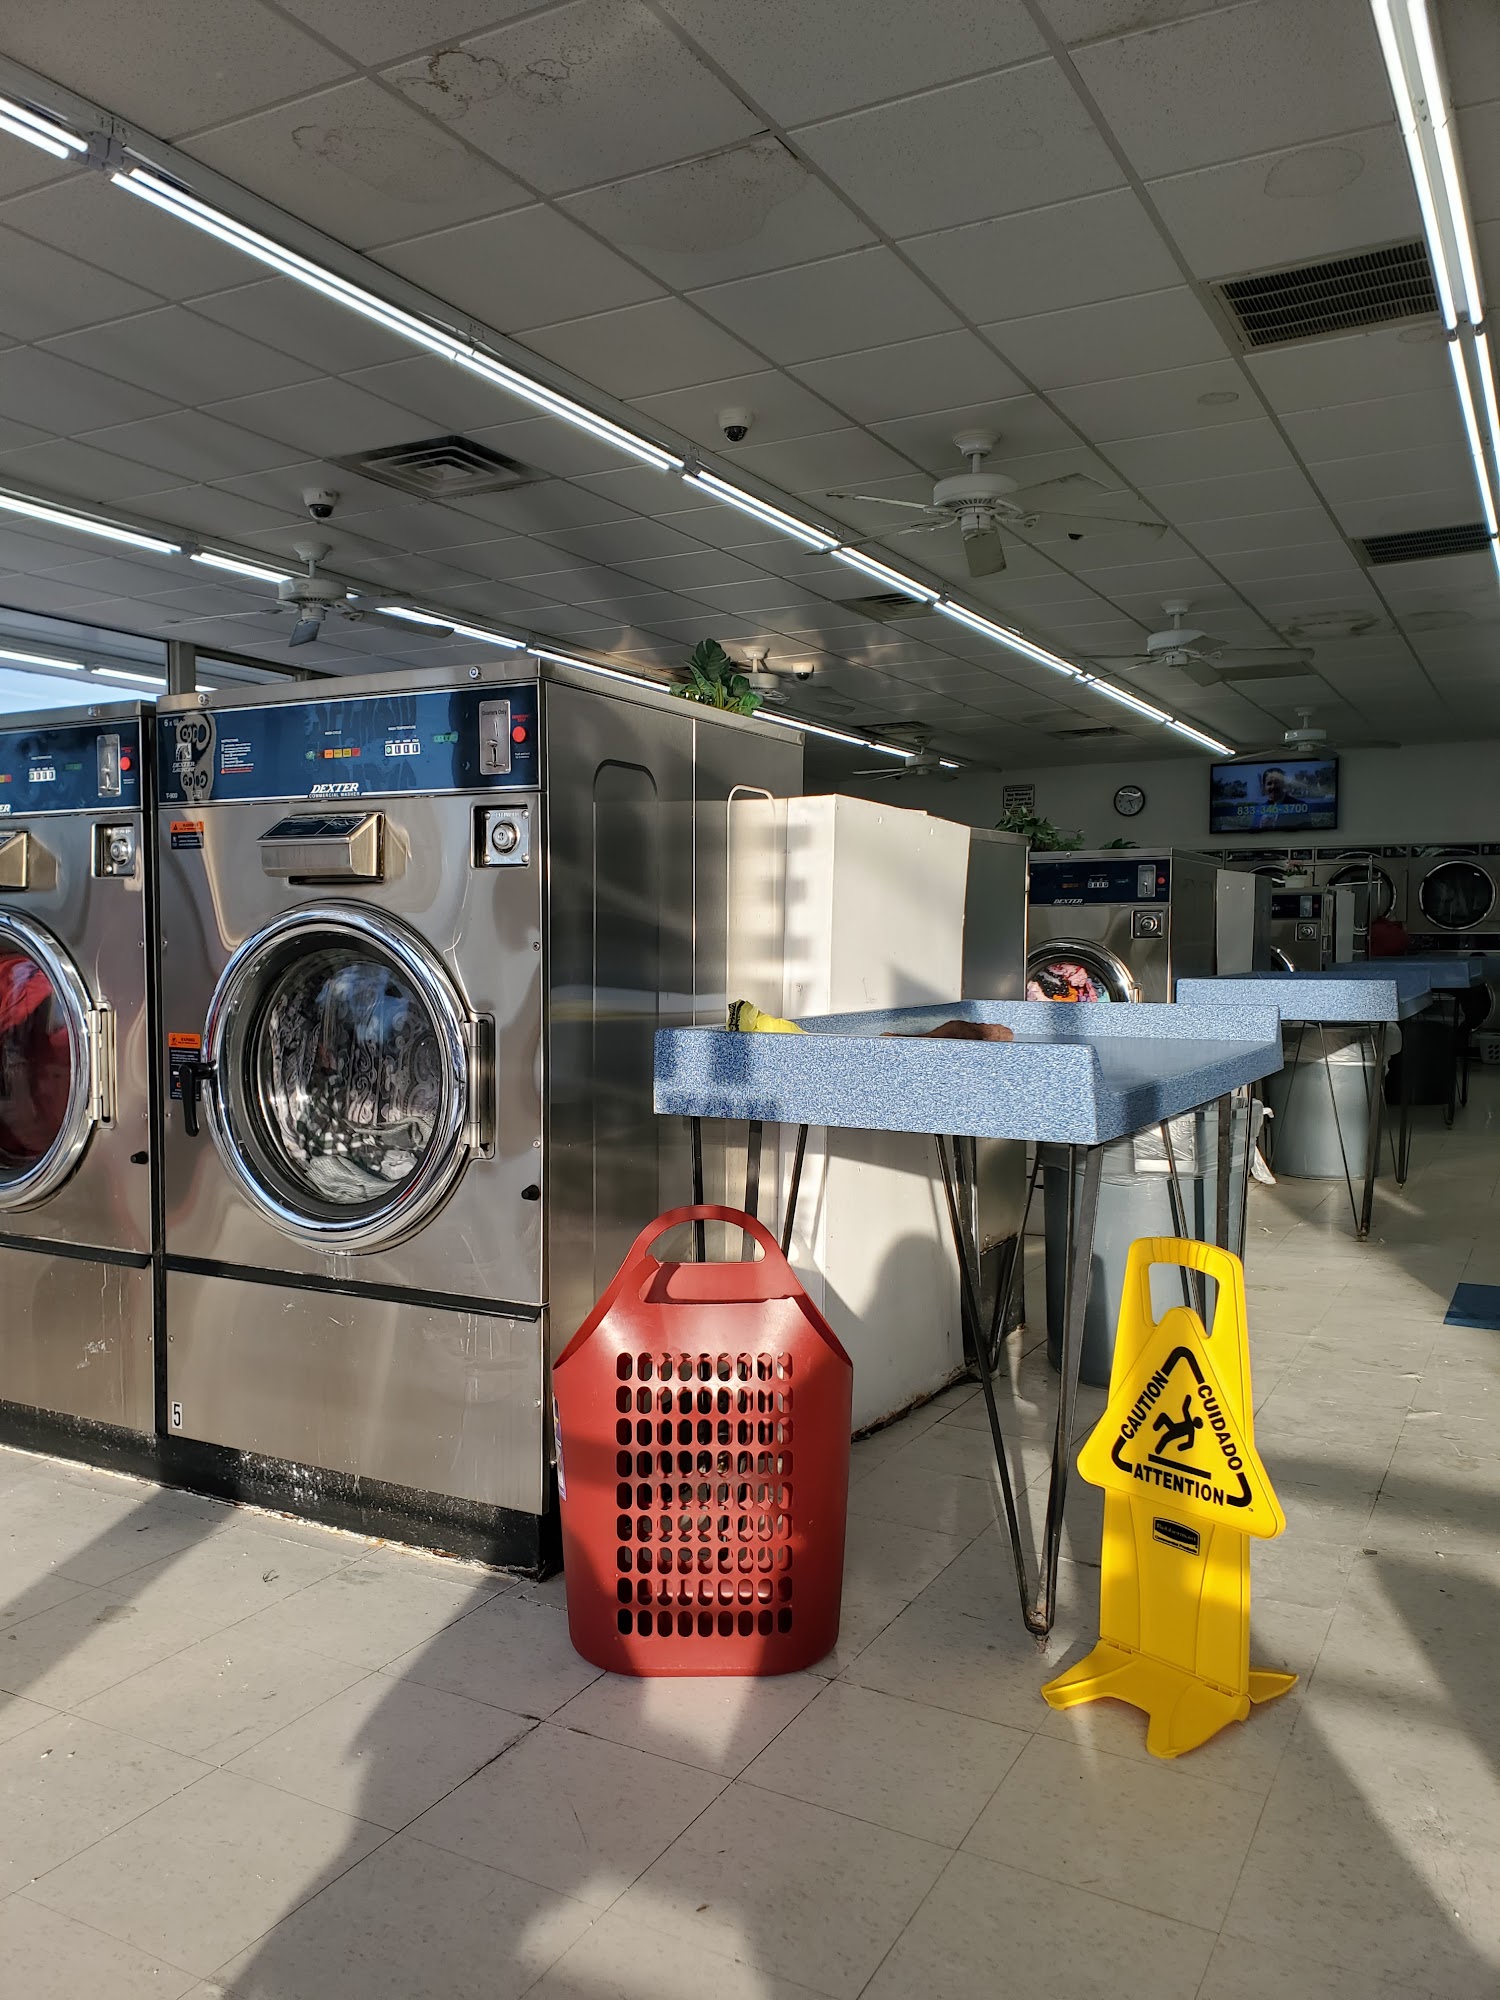 Mesquite Wash & Dry Coin Laundry - Laundromat